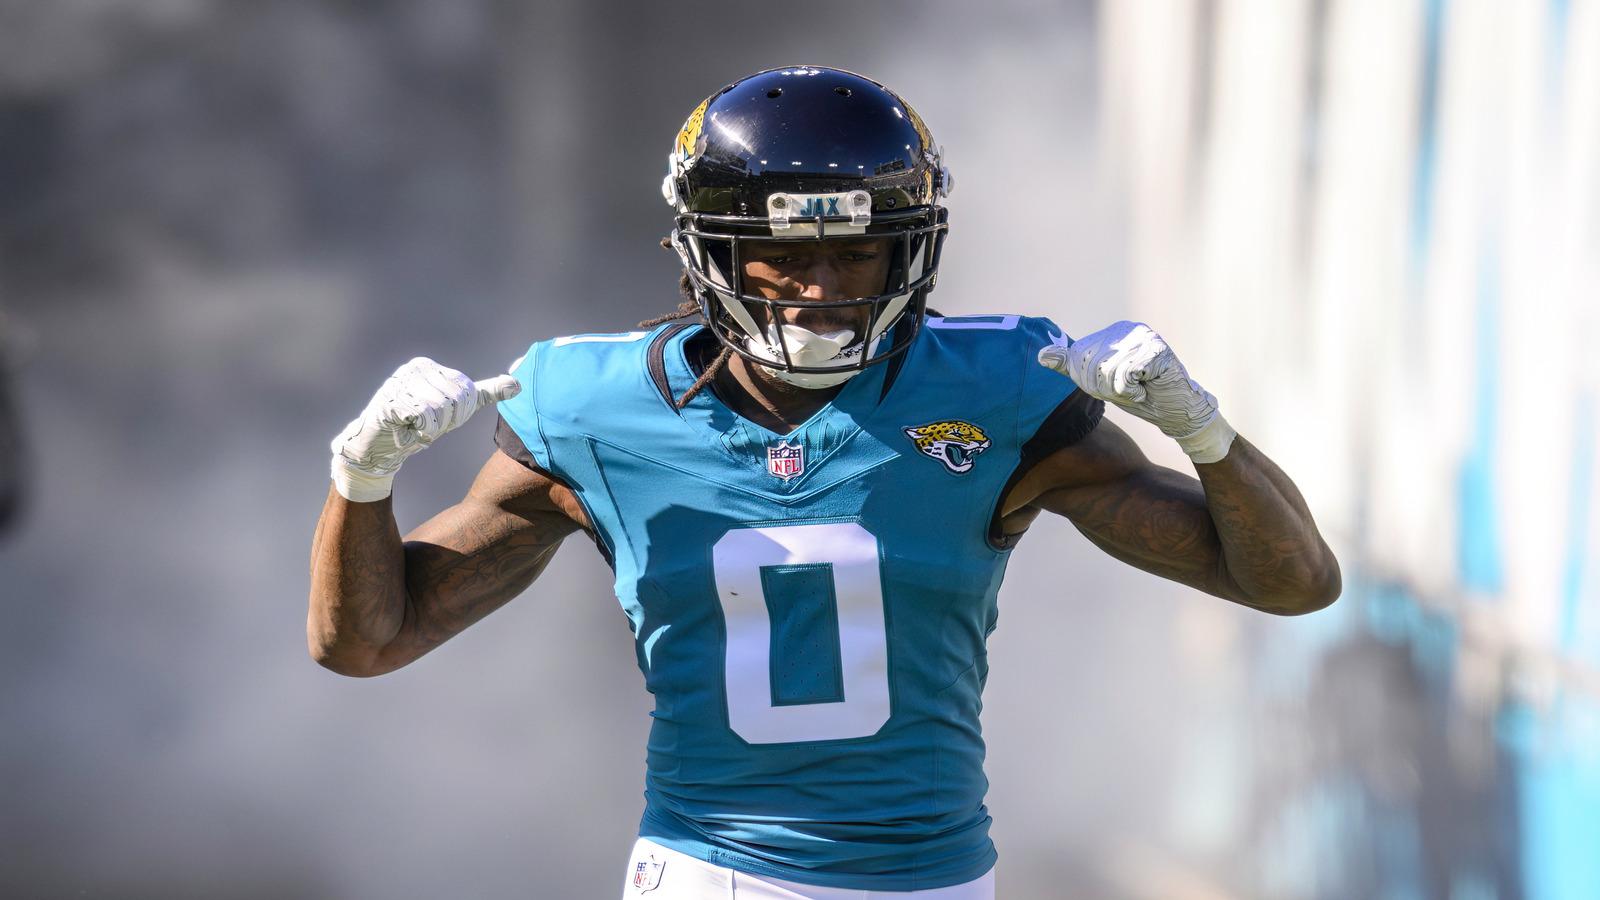 Calvin Ridley will hit NFL free agency if the Jaguars cannot finalize a deal before March 13